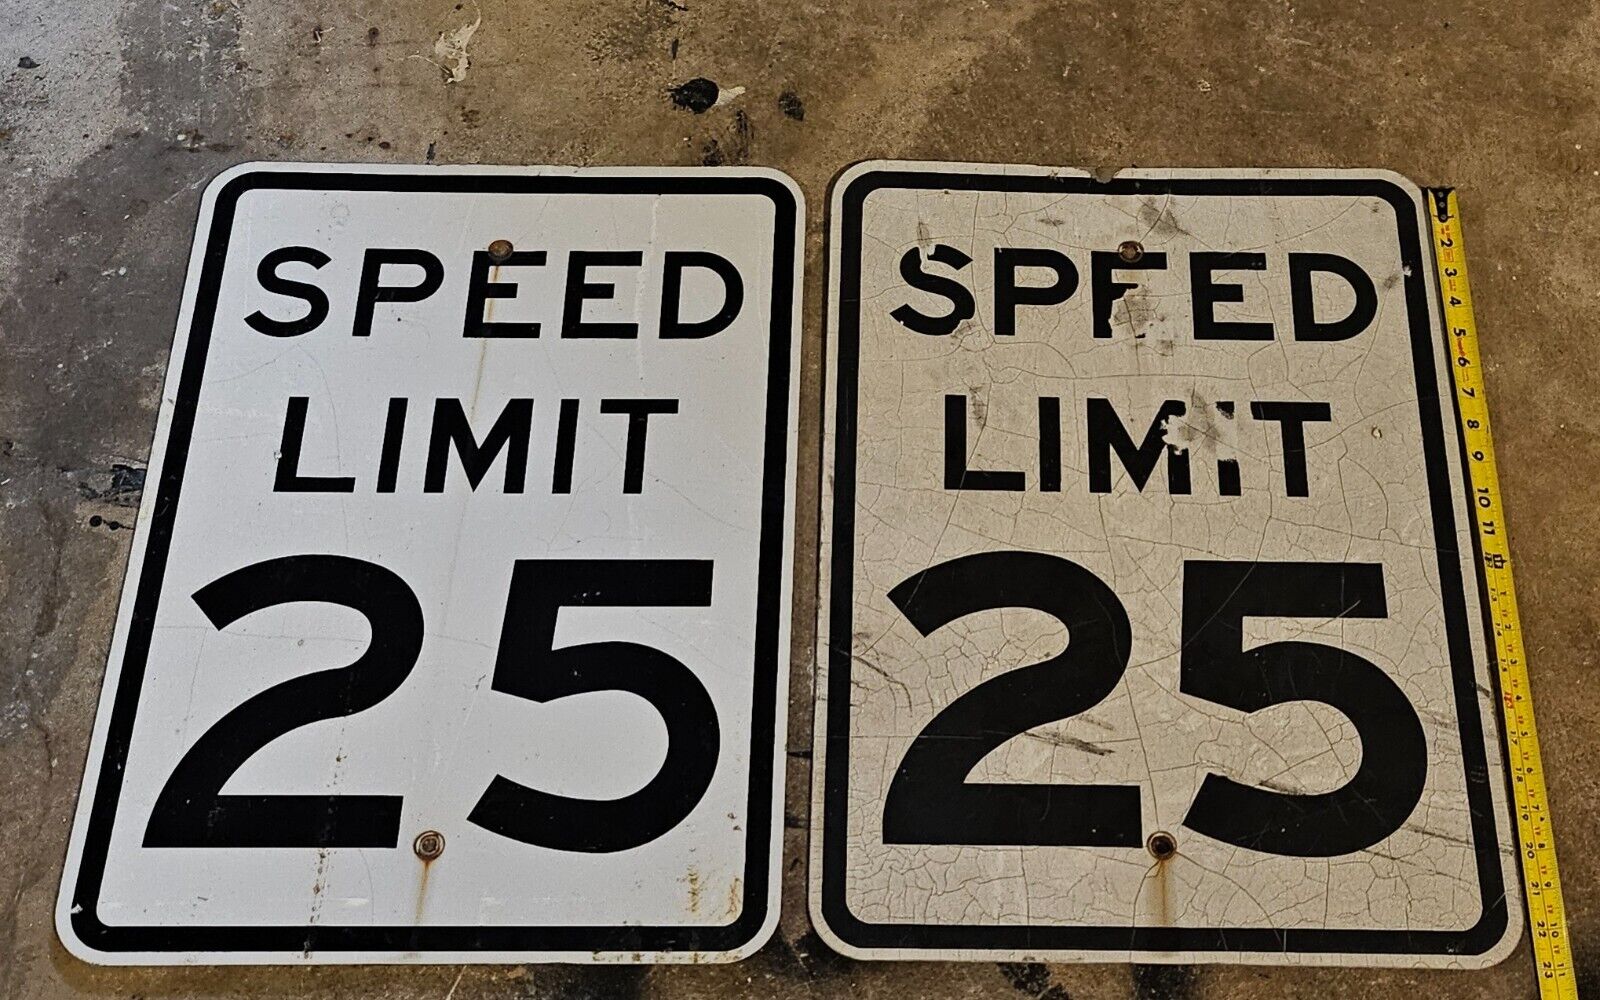 2 retired Authentic Road Street Sign (Speed Limit 25) 30